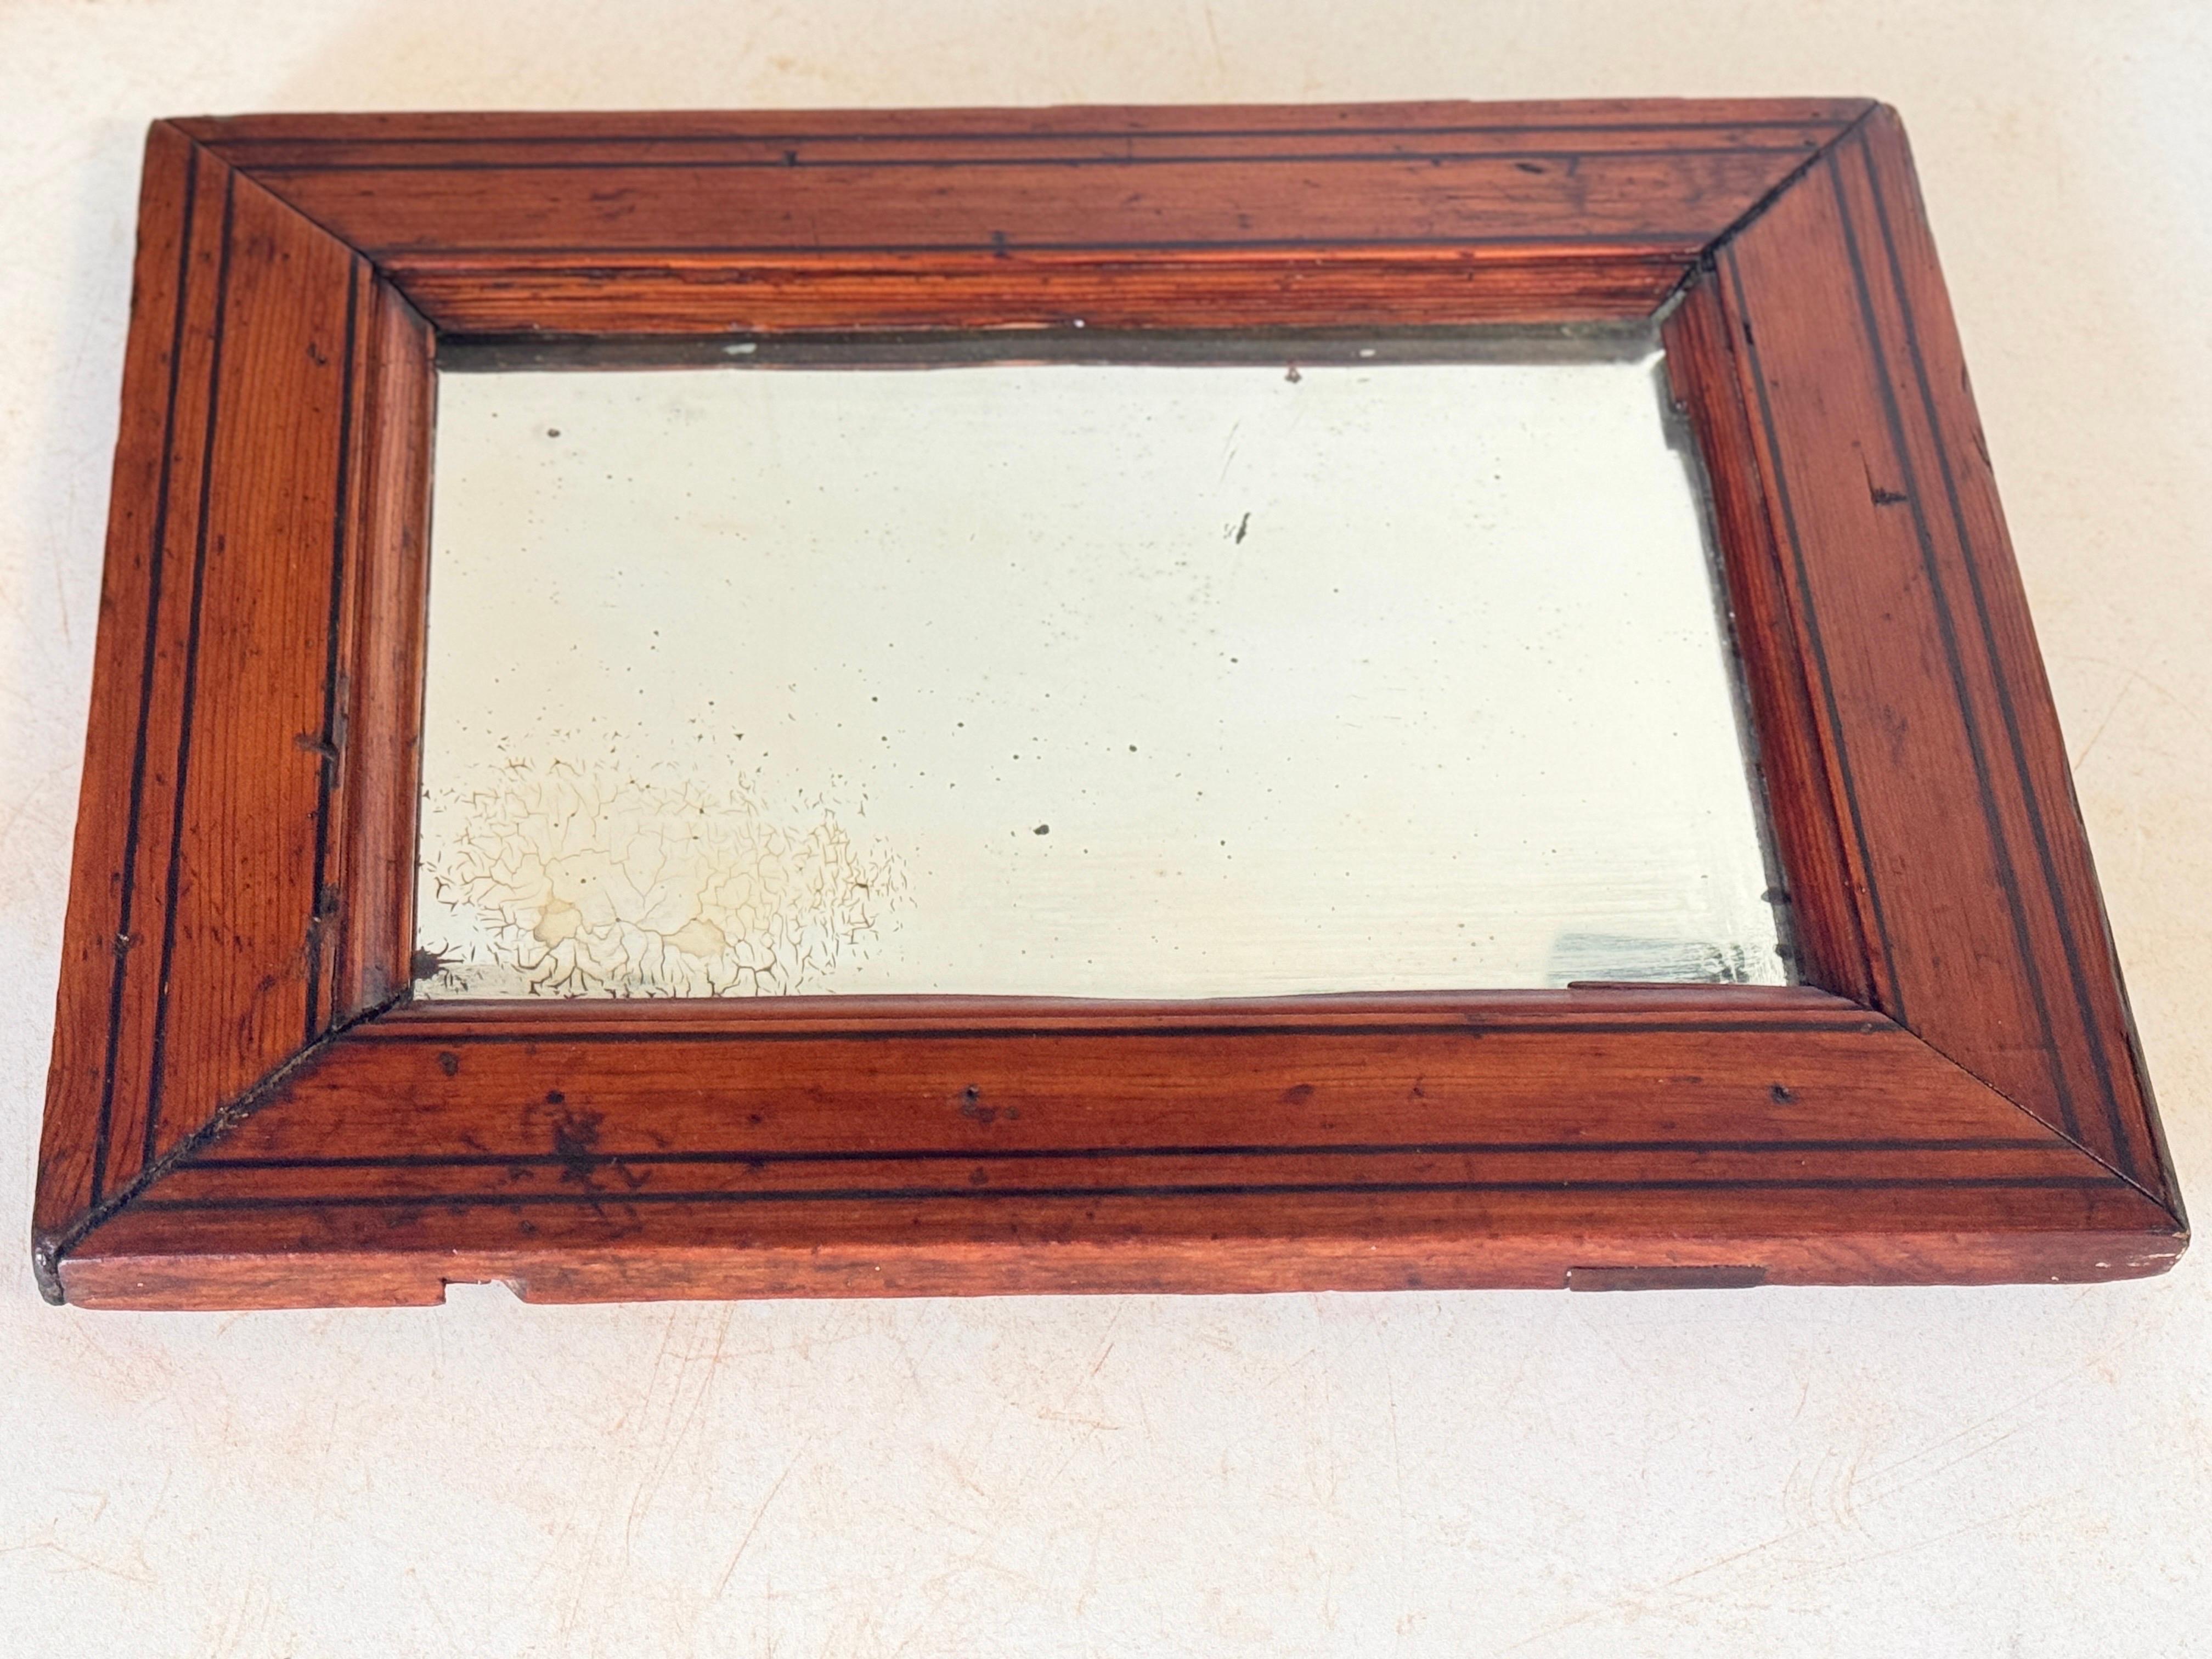 Mirror in wood, in a brown color, old glass mirror, circa 1940.